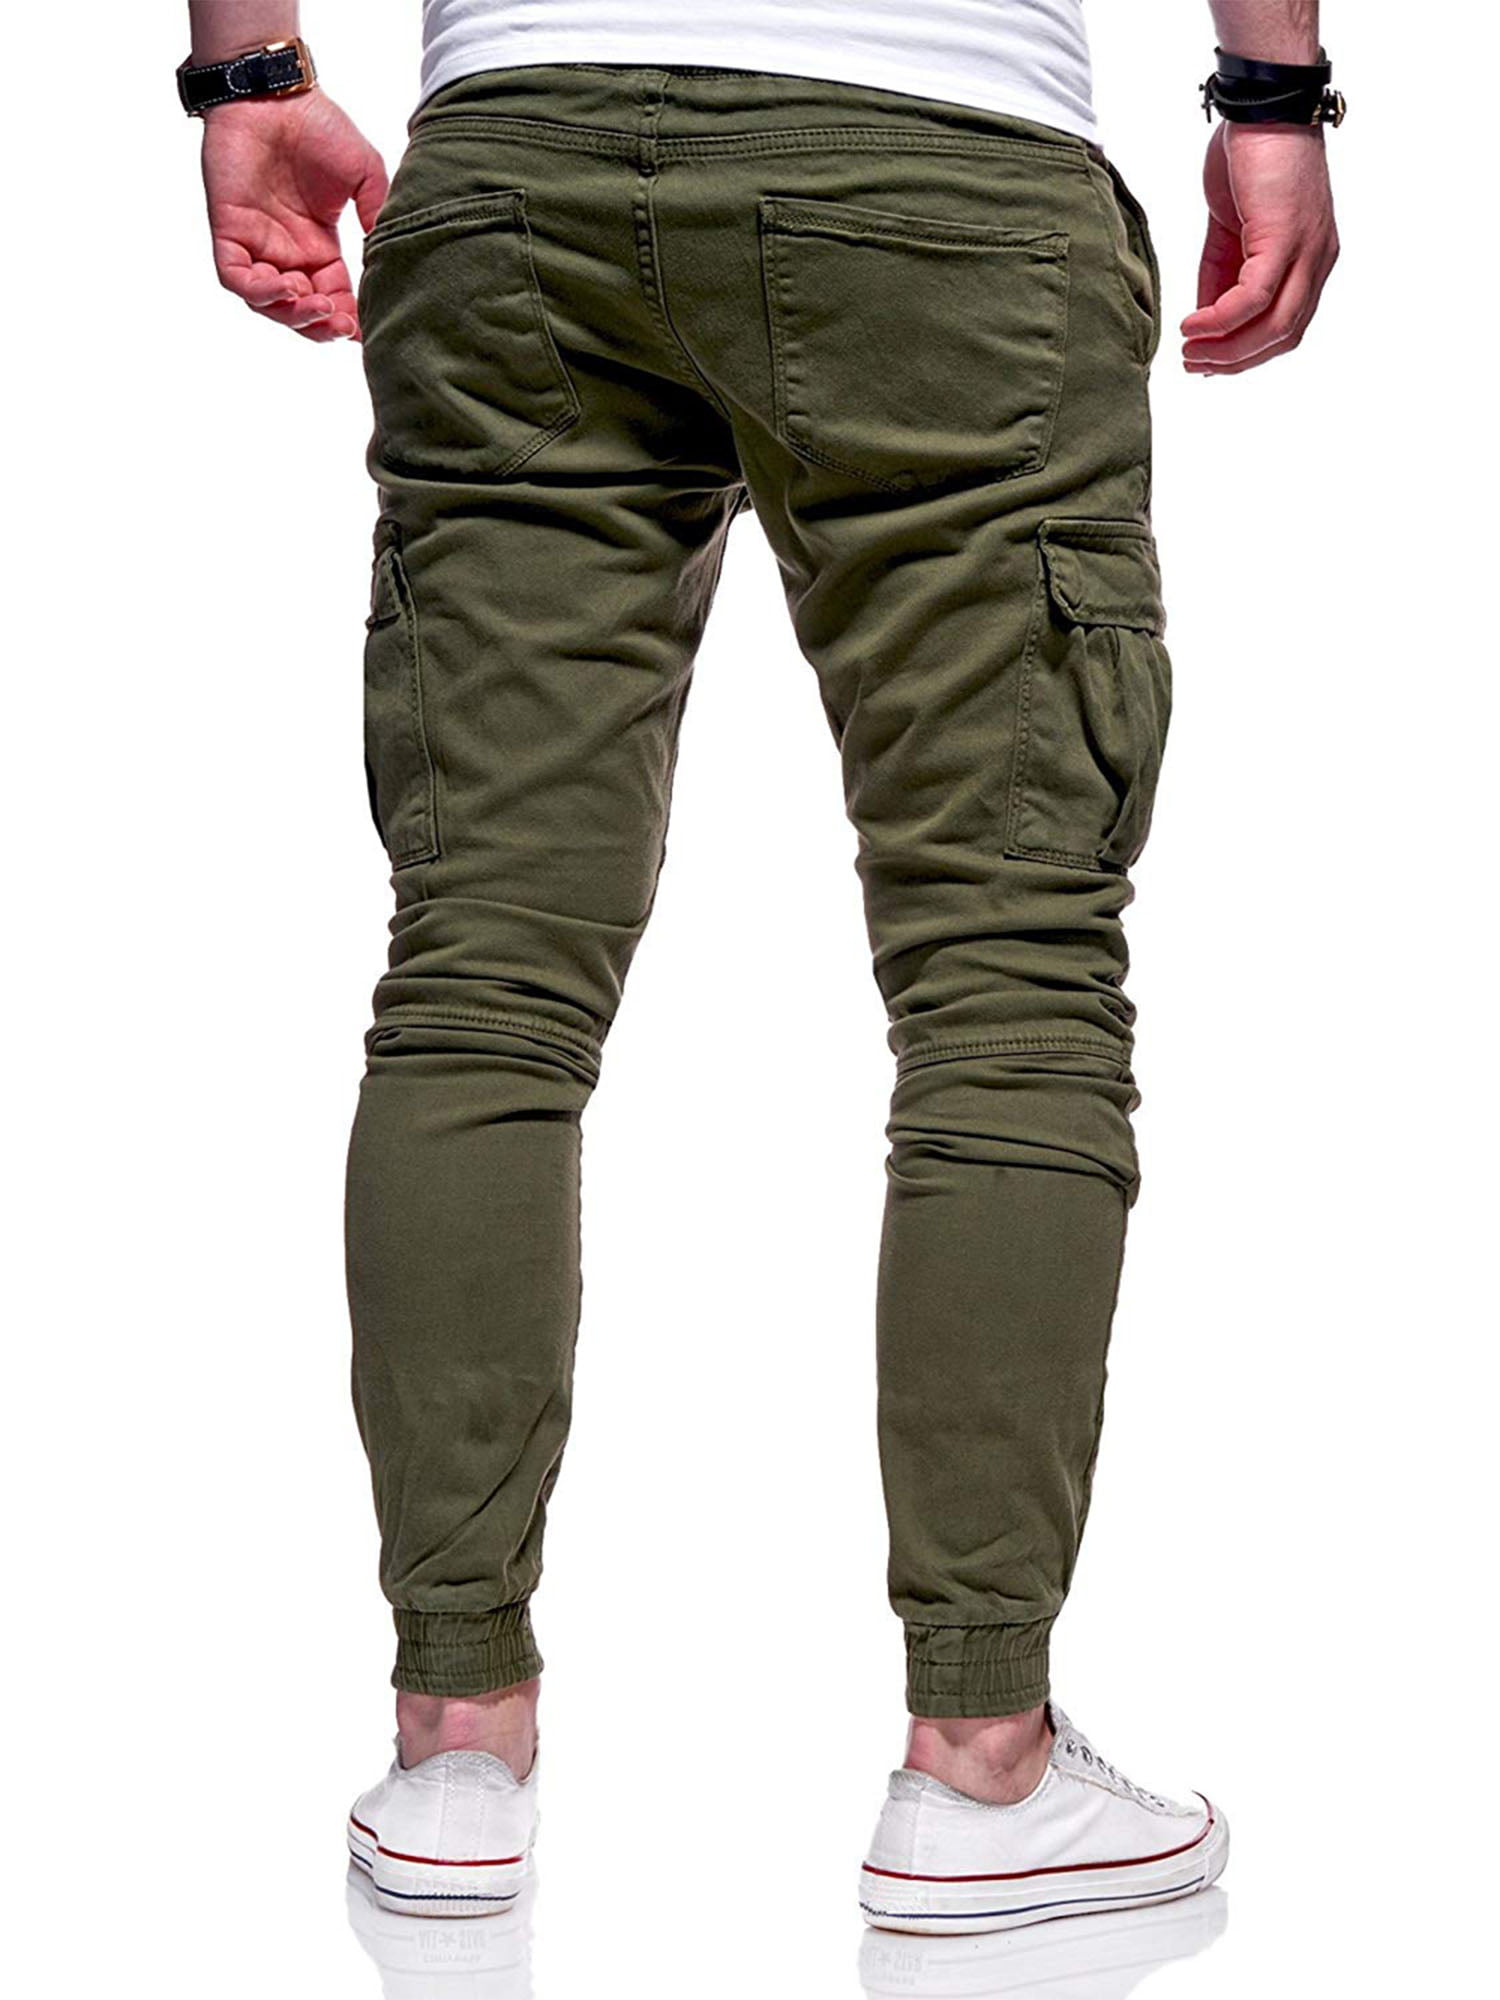 KSODFNXH Sweatpants for Men Fashion Cargo Pants for Men with Pockets Casual  Oversized Plus Size Comfy Loose Sweatpants, C#army Green, Small :  : Clothing, Shoes & Accessories